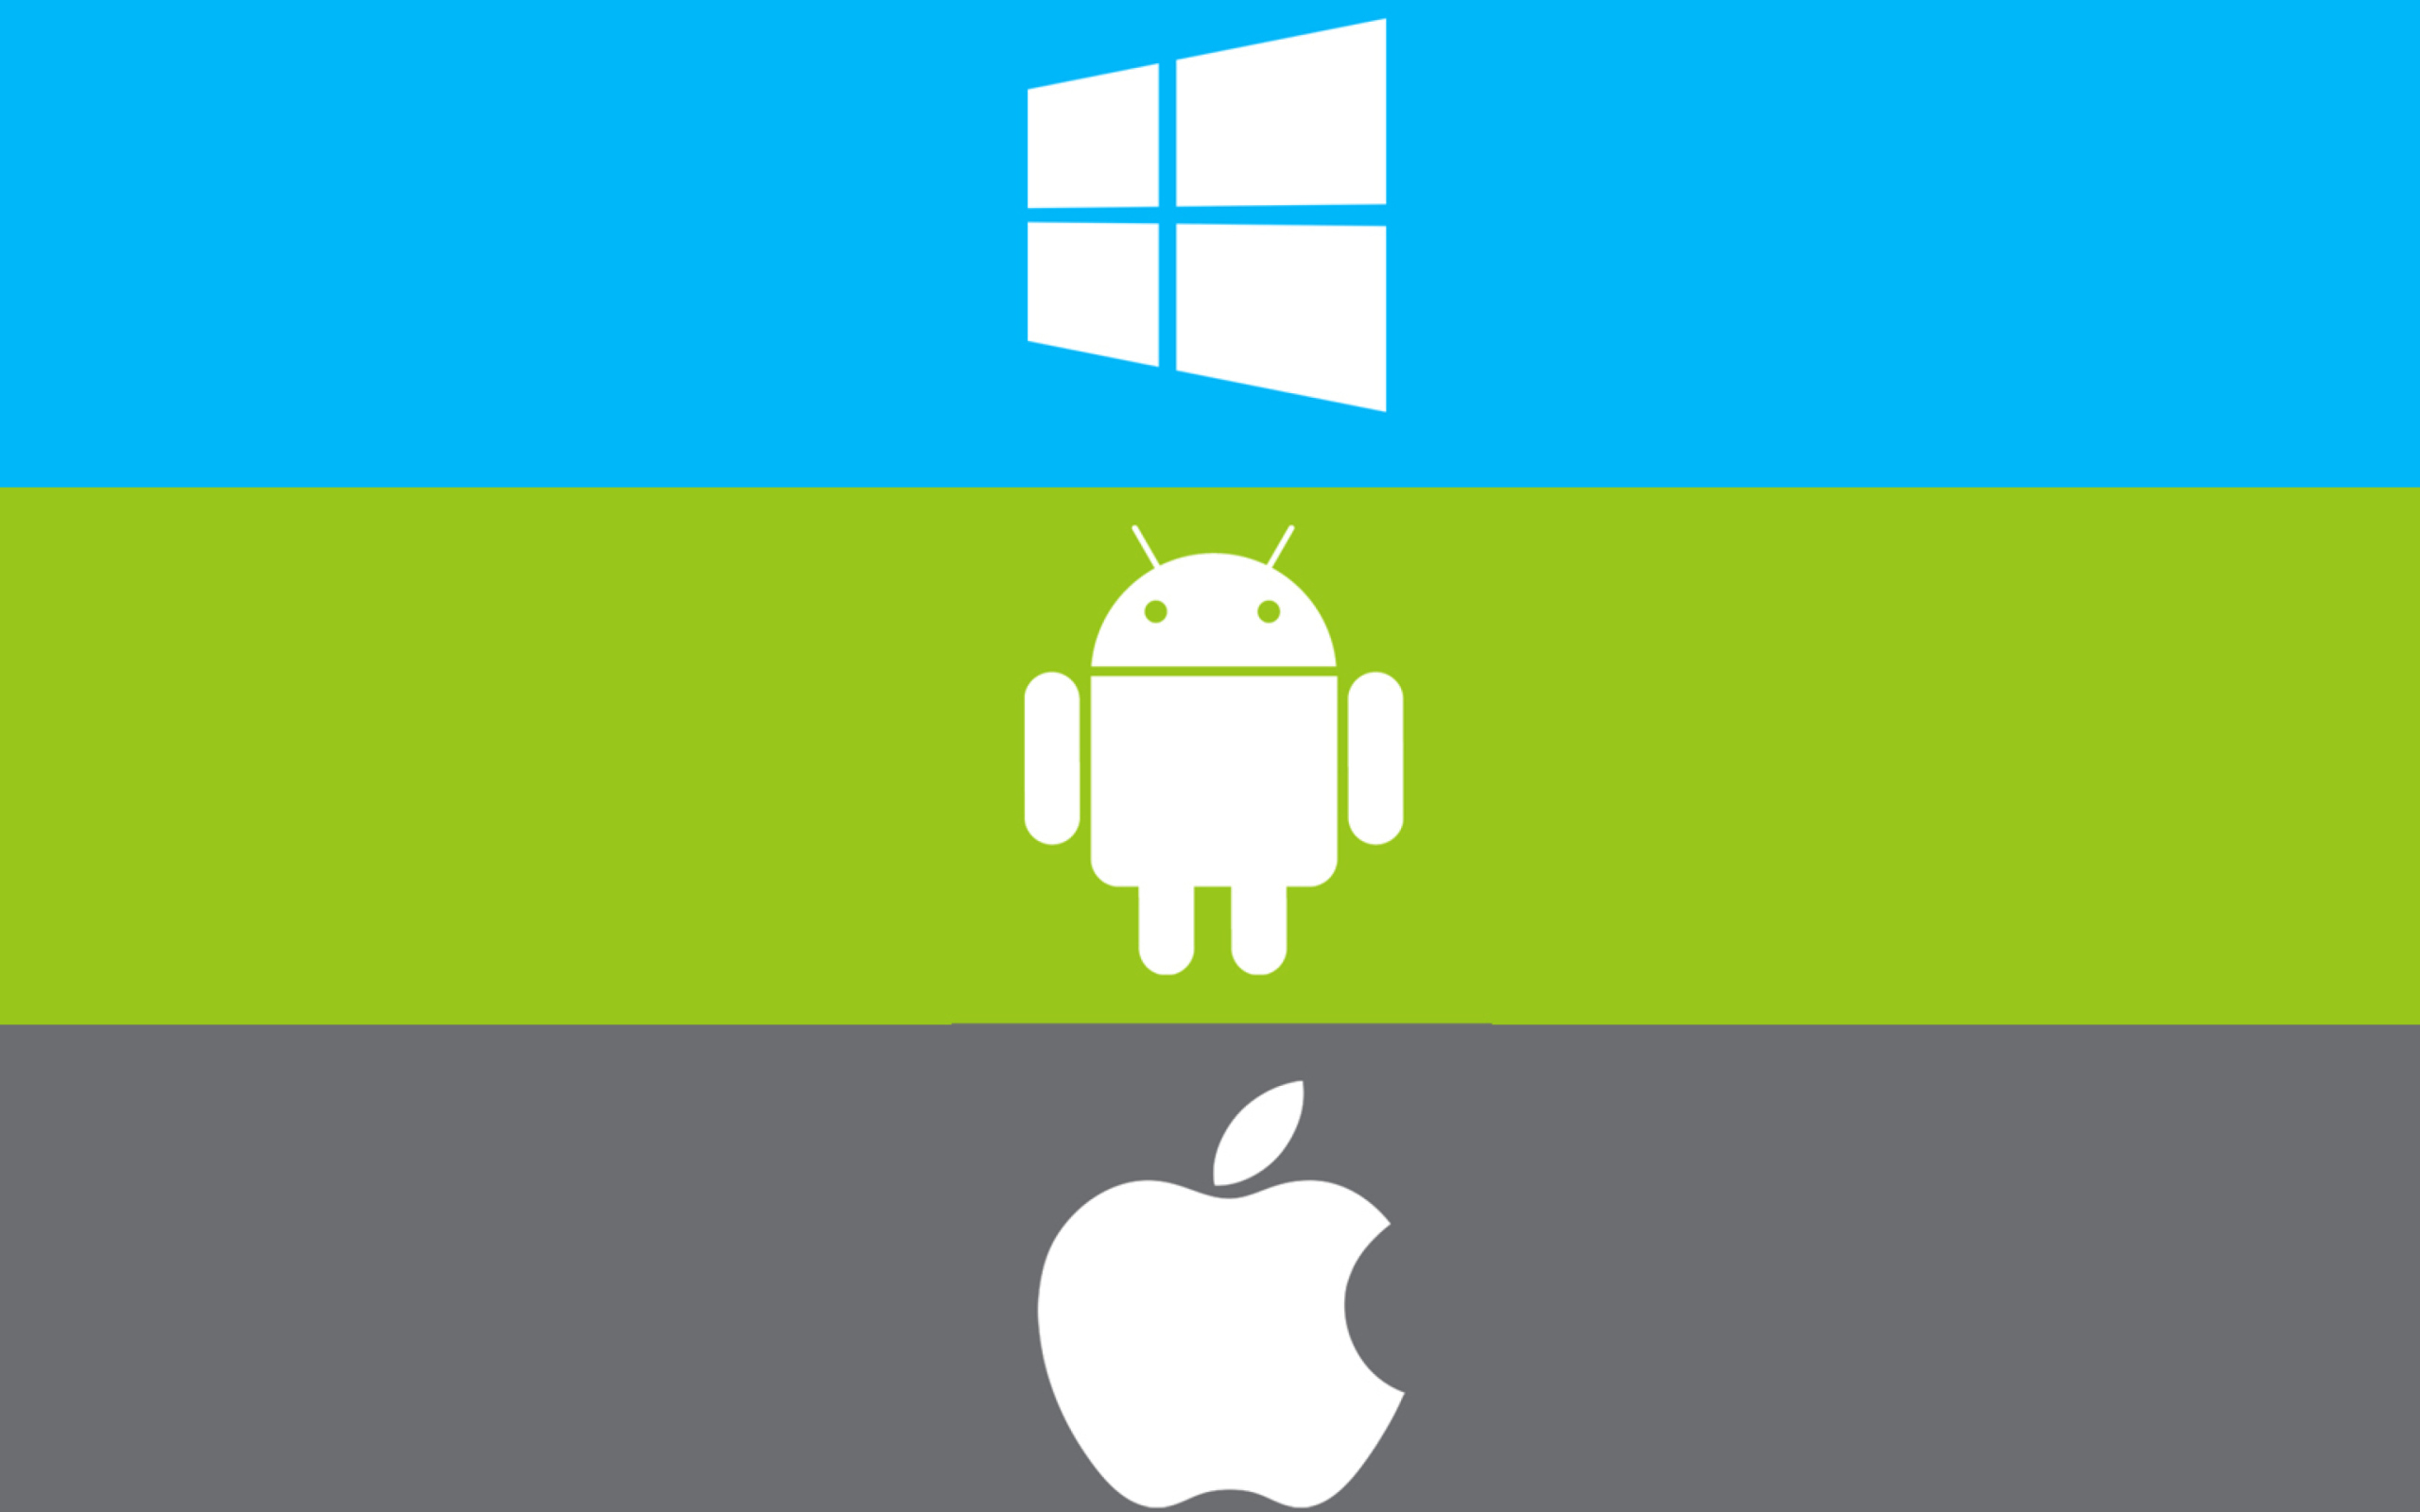 Windows, Apple, Android - What's Your Choice? screenshot #1 2560x1600